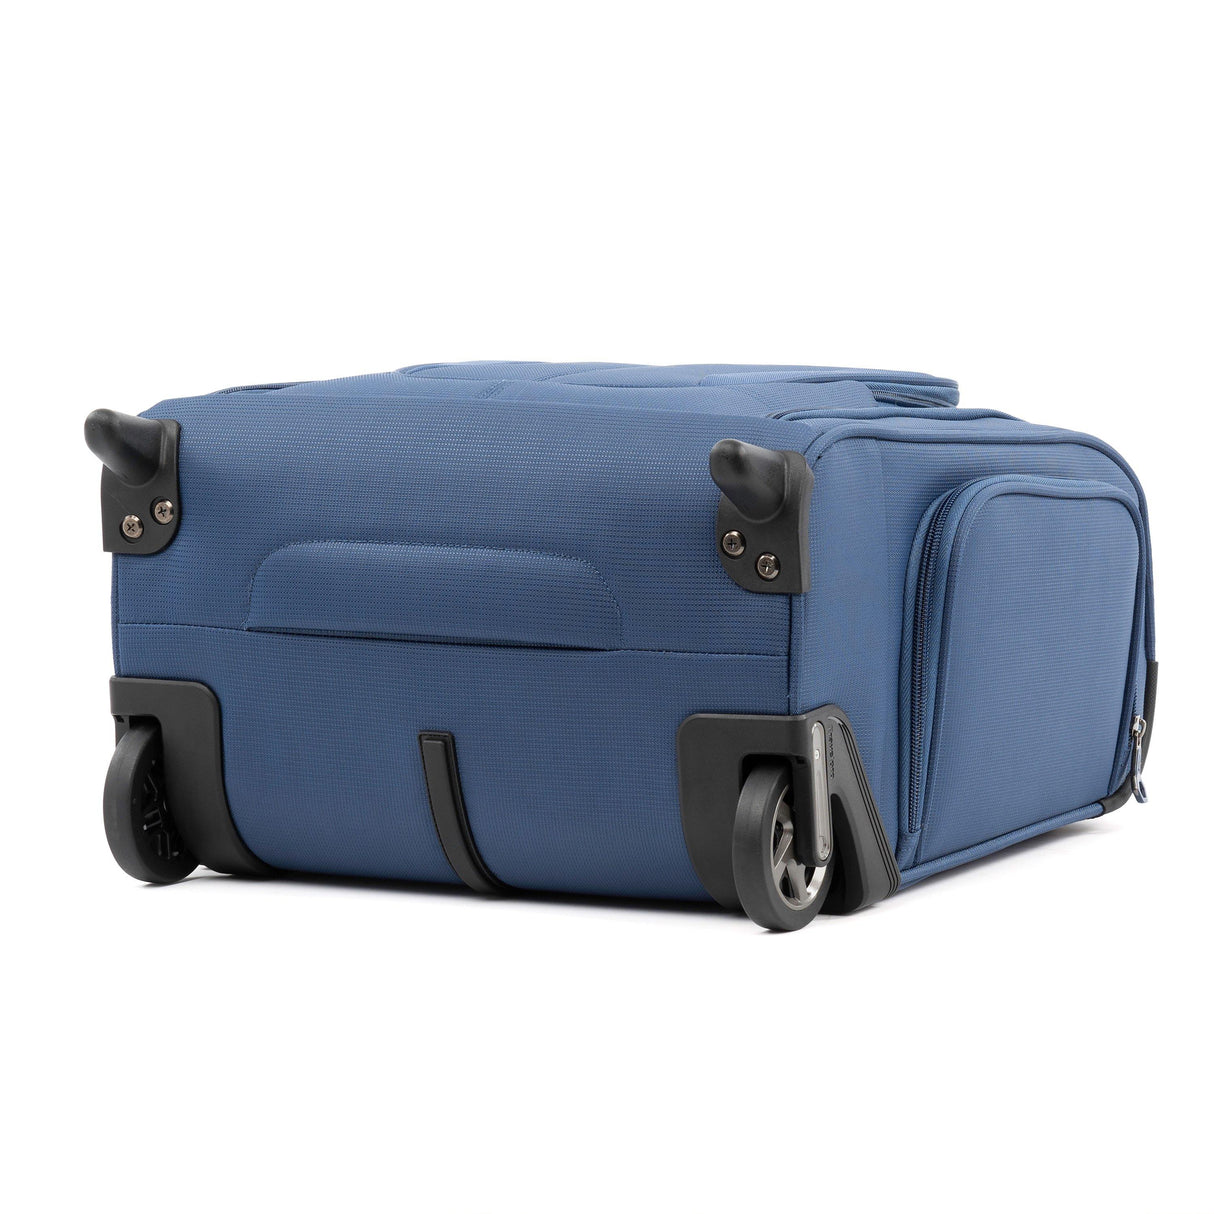 Travelpro Tourlite Rolling Underseat Carry-On , , 79840792439064d9701baf6a7a1475ff2547fb7e886567512345402f1c9ded78